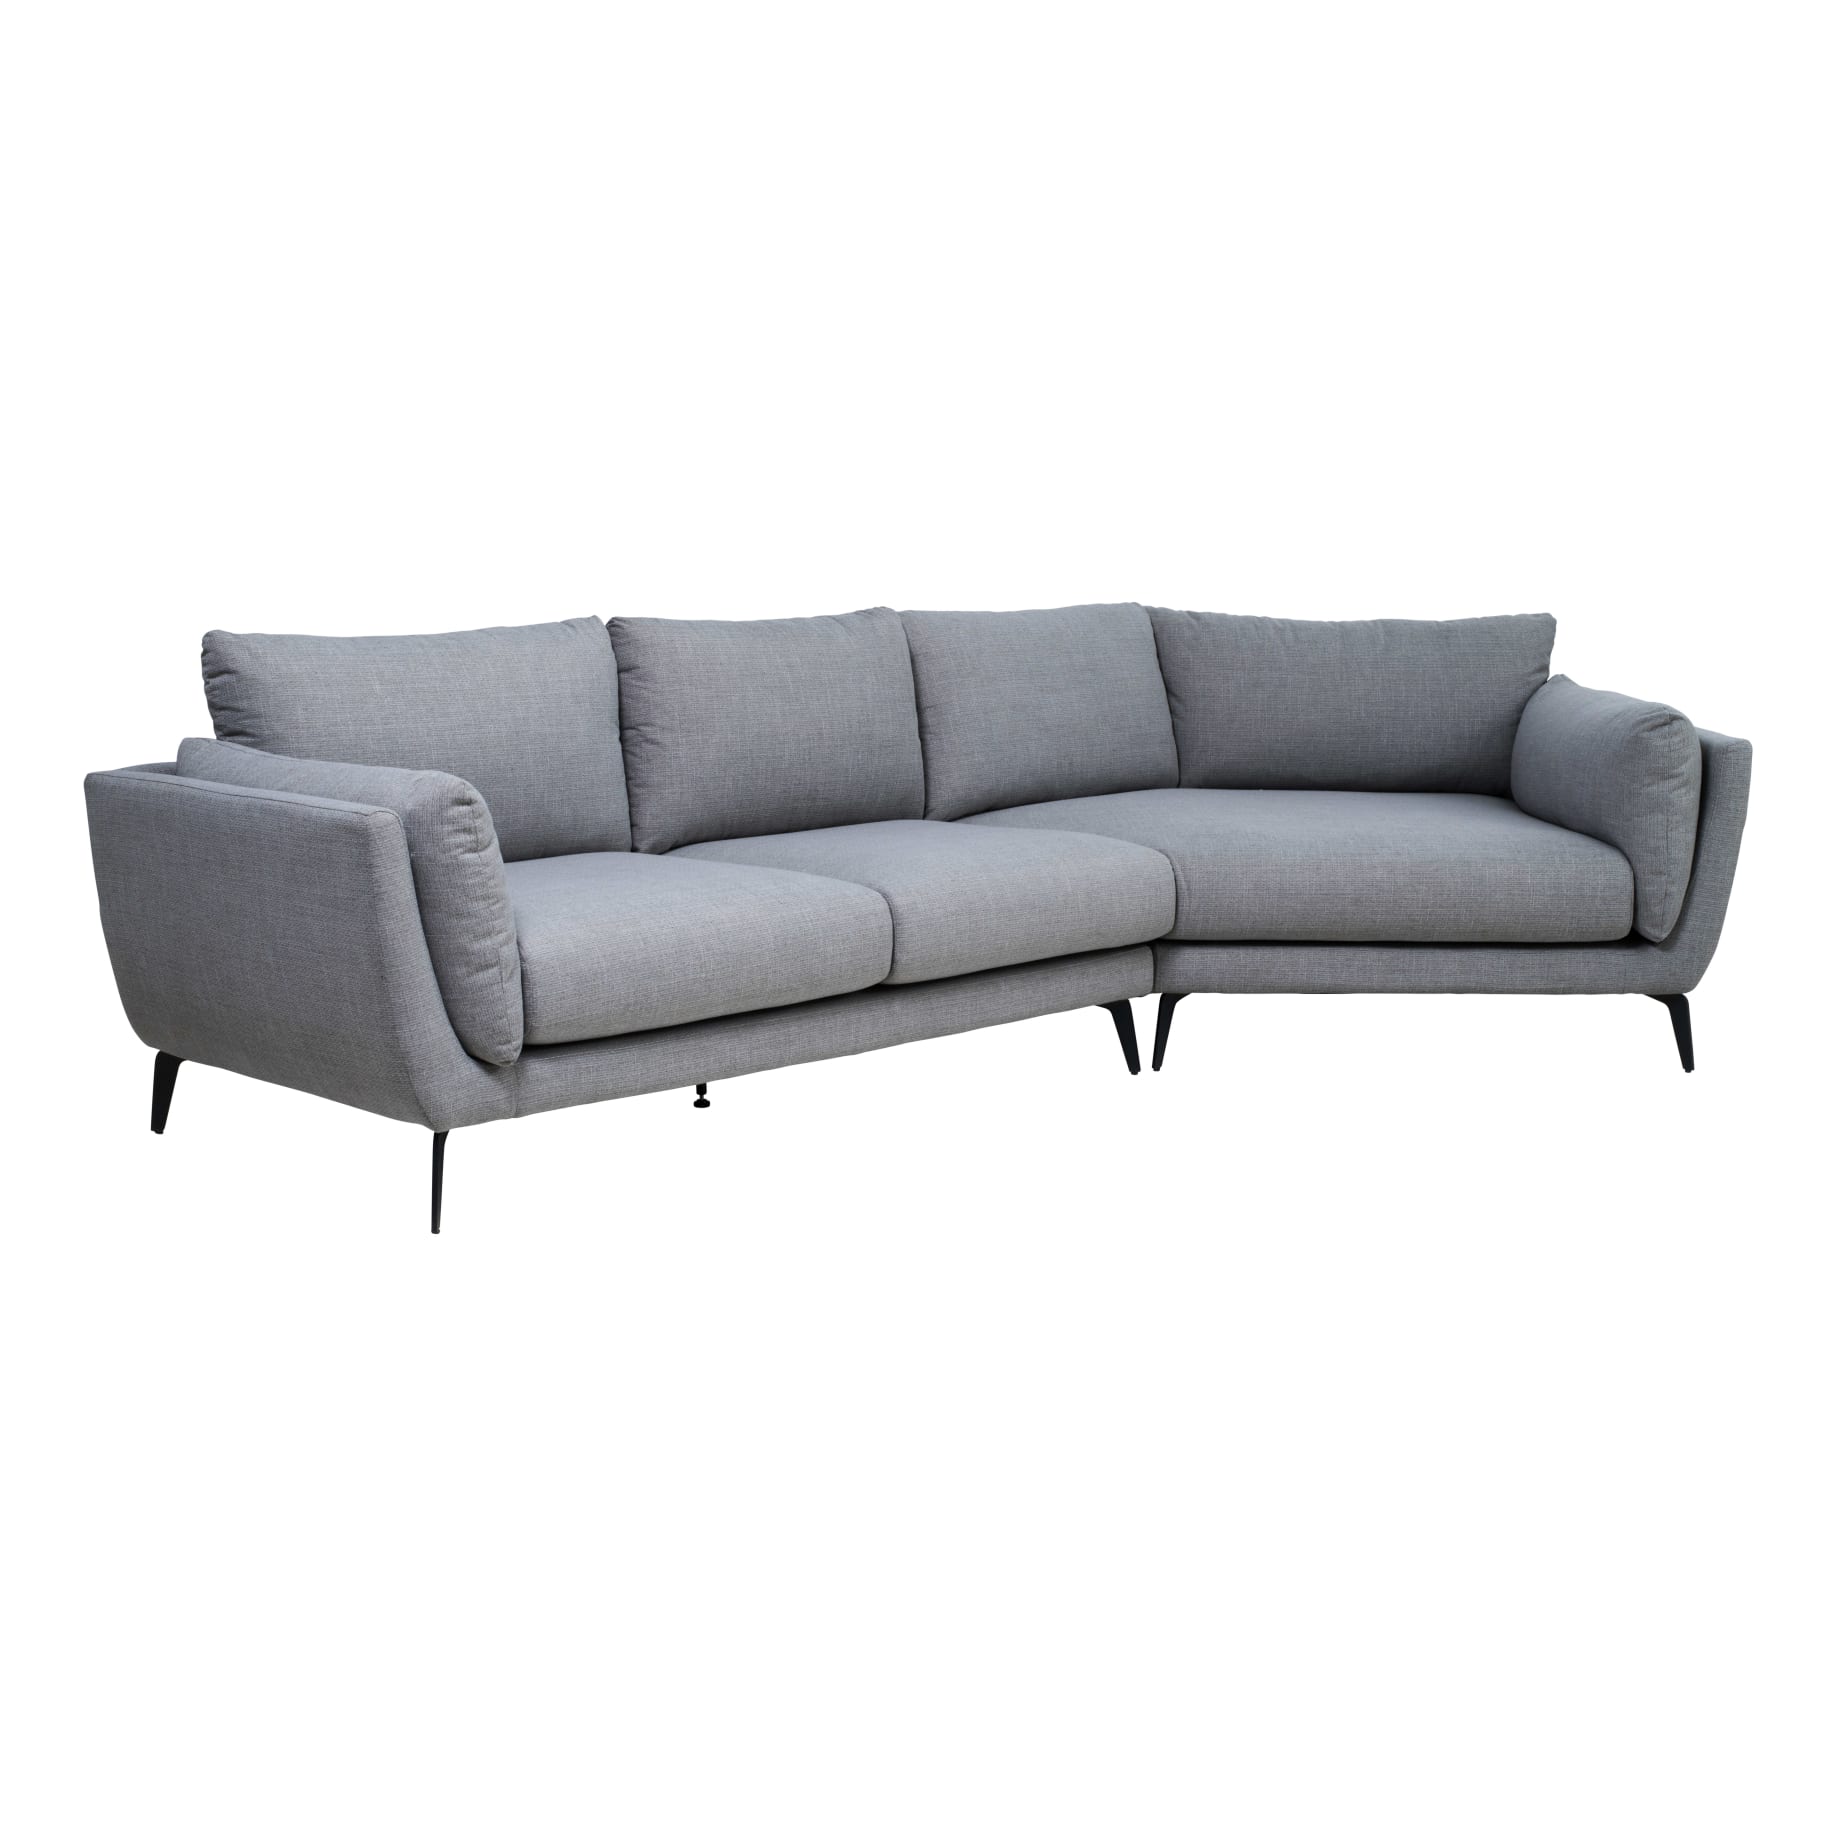 Everett 2 Seater+Angled Chaise RHF in Charcoal